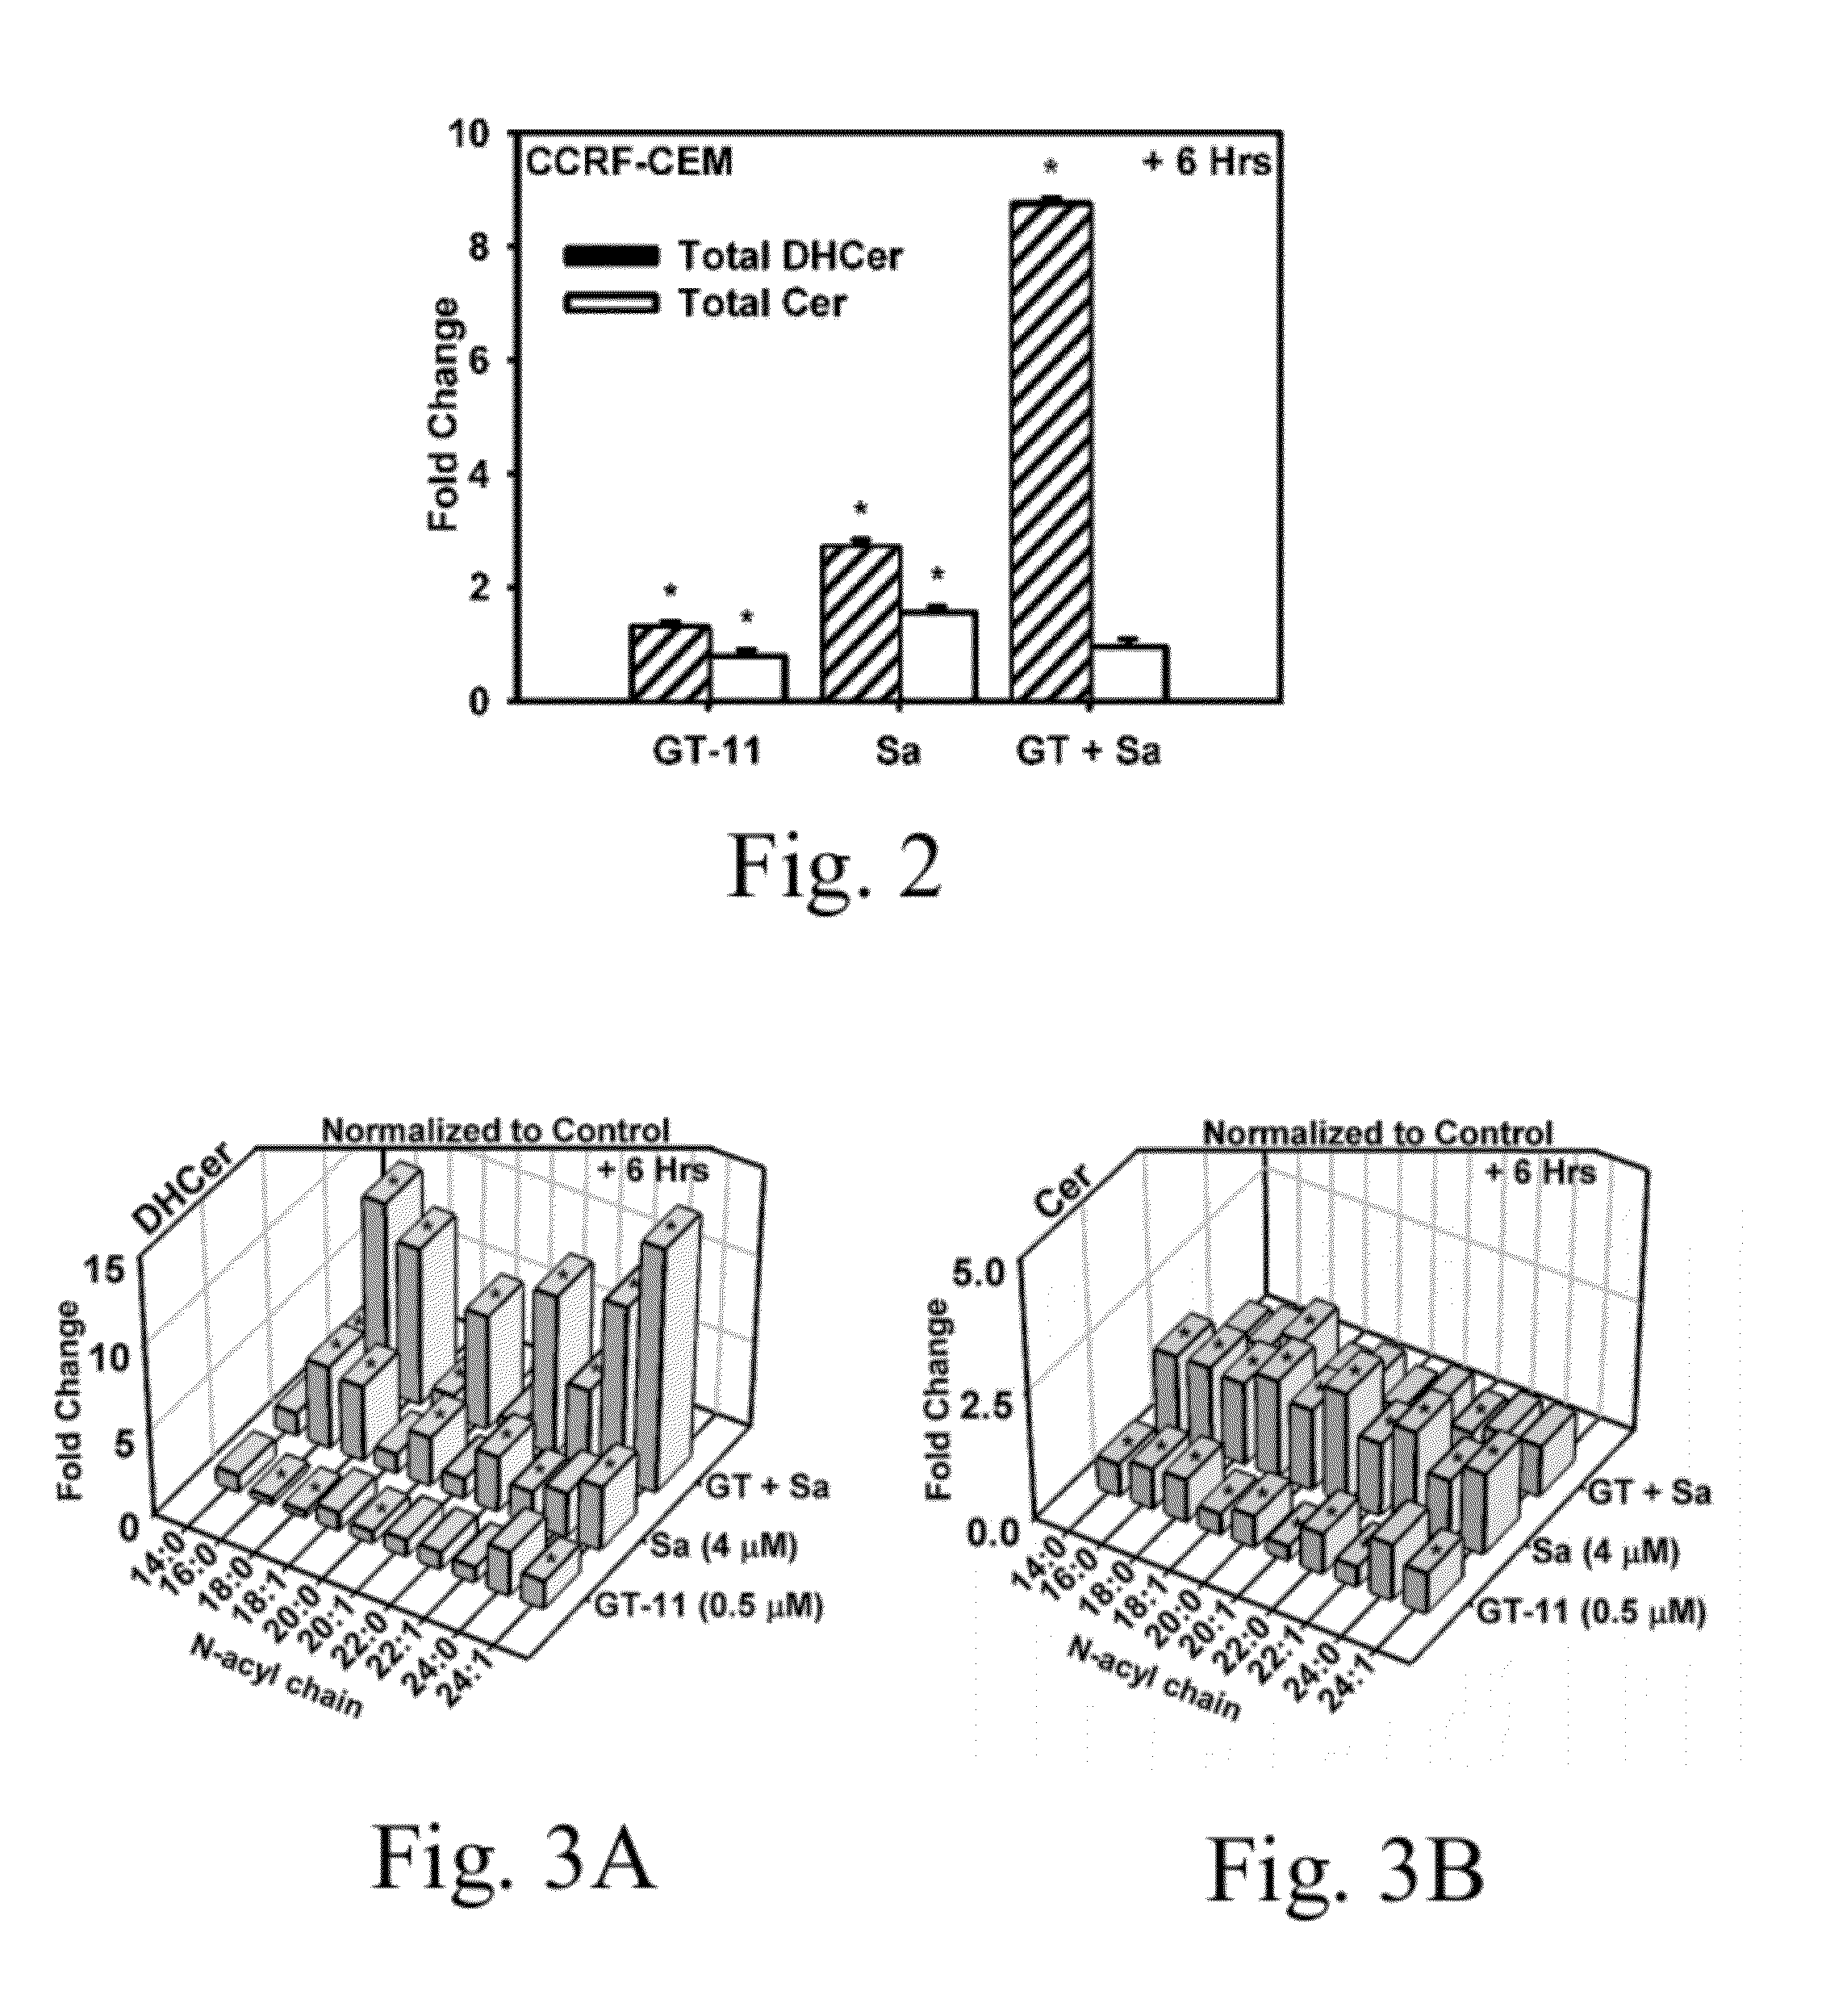 Method for Increasing the Production of a Specific ACYL-Chain Dihydroceramide(s) for Improving the Effectiveness of Cancer Treatments